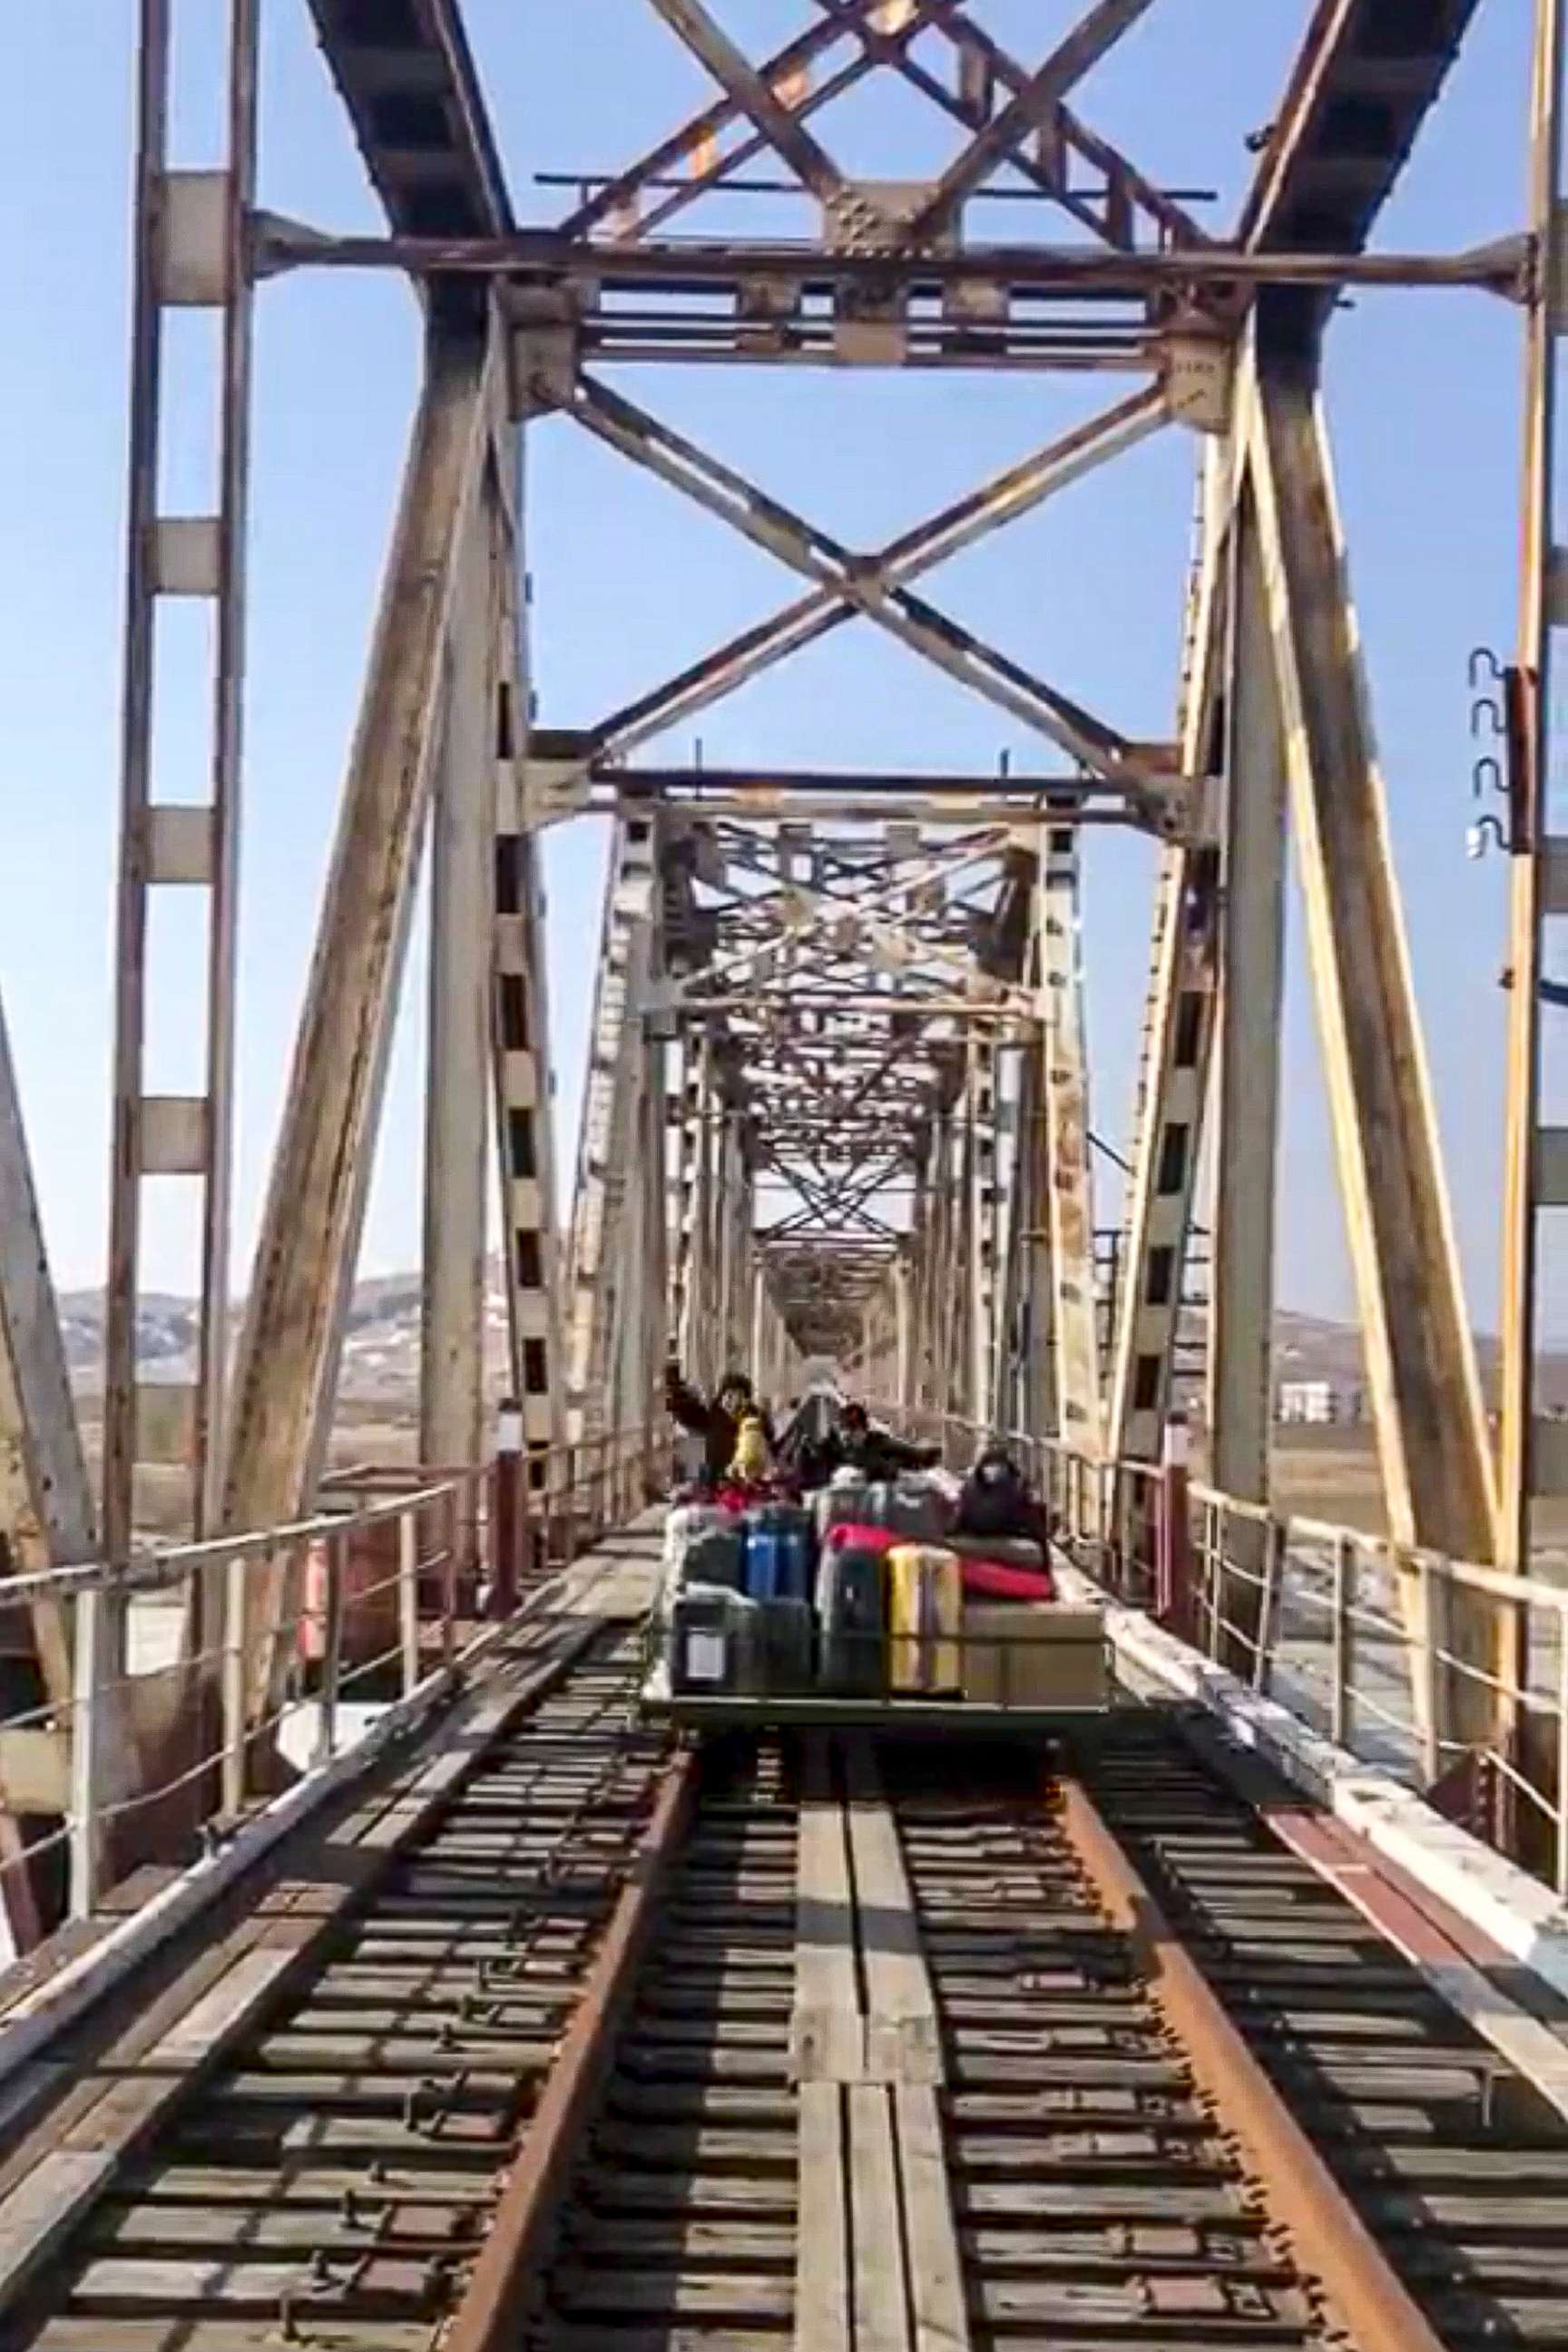 PHOTO: In this image taken from a video released by Russian Foreign Ministry Press Service, Feb. 25, 2021, a group of Russian diplomats push hand-pushed rail trolley with their children and suitcases crossing a railway bridge to the border with Russia.